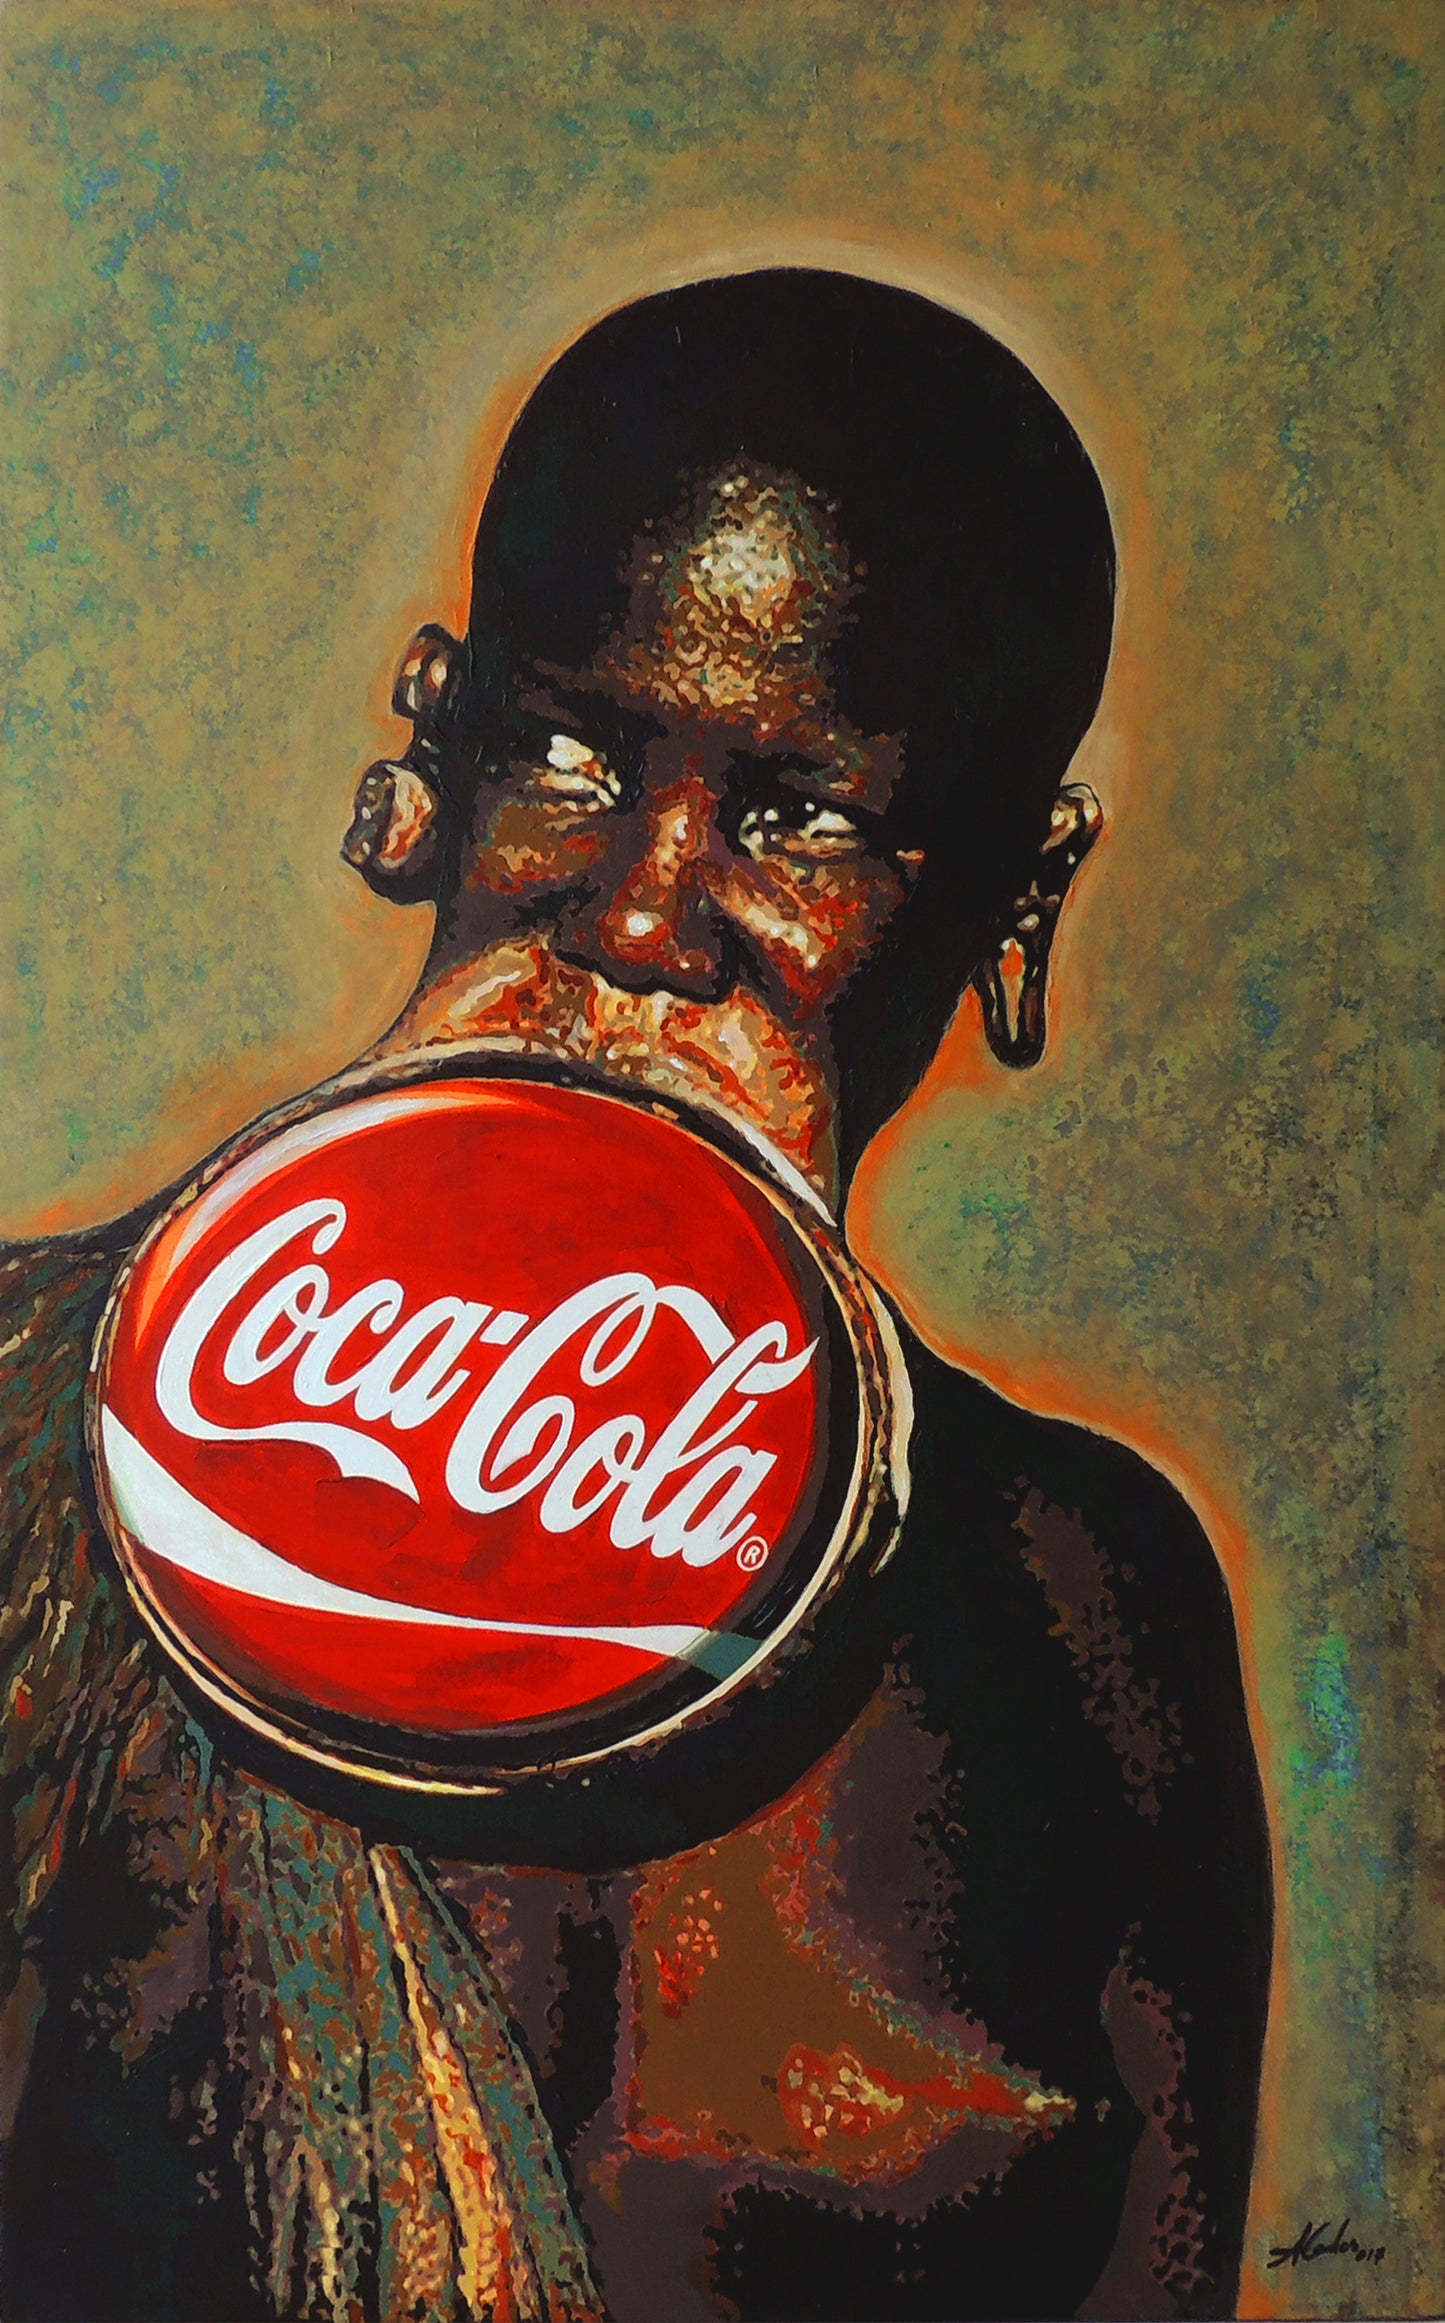 Enjoy Africa, from the series Soft Drink